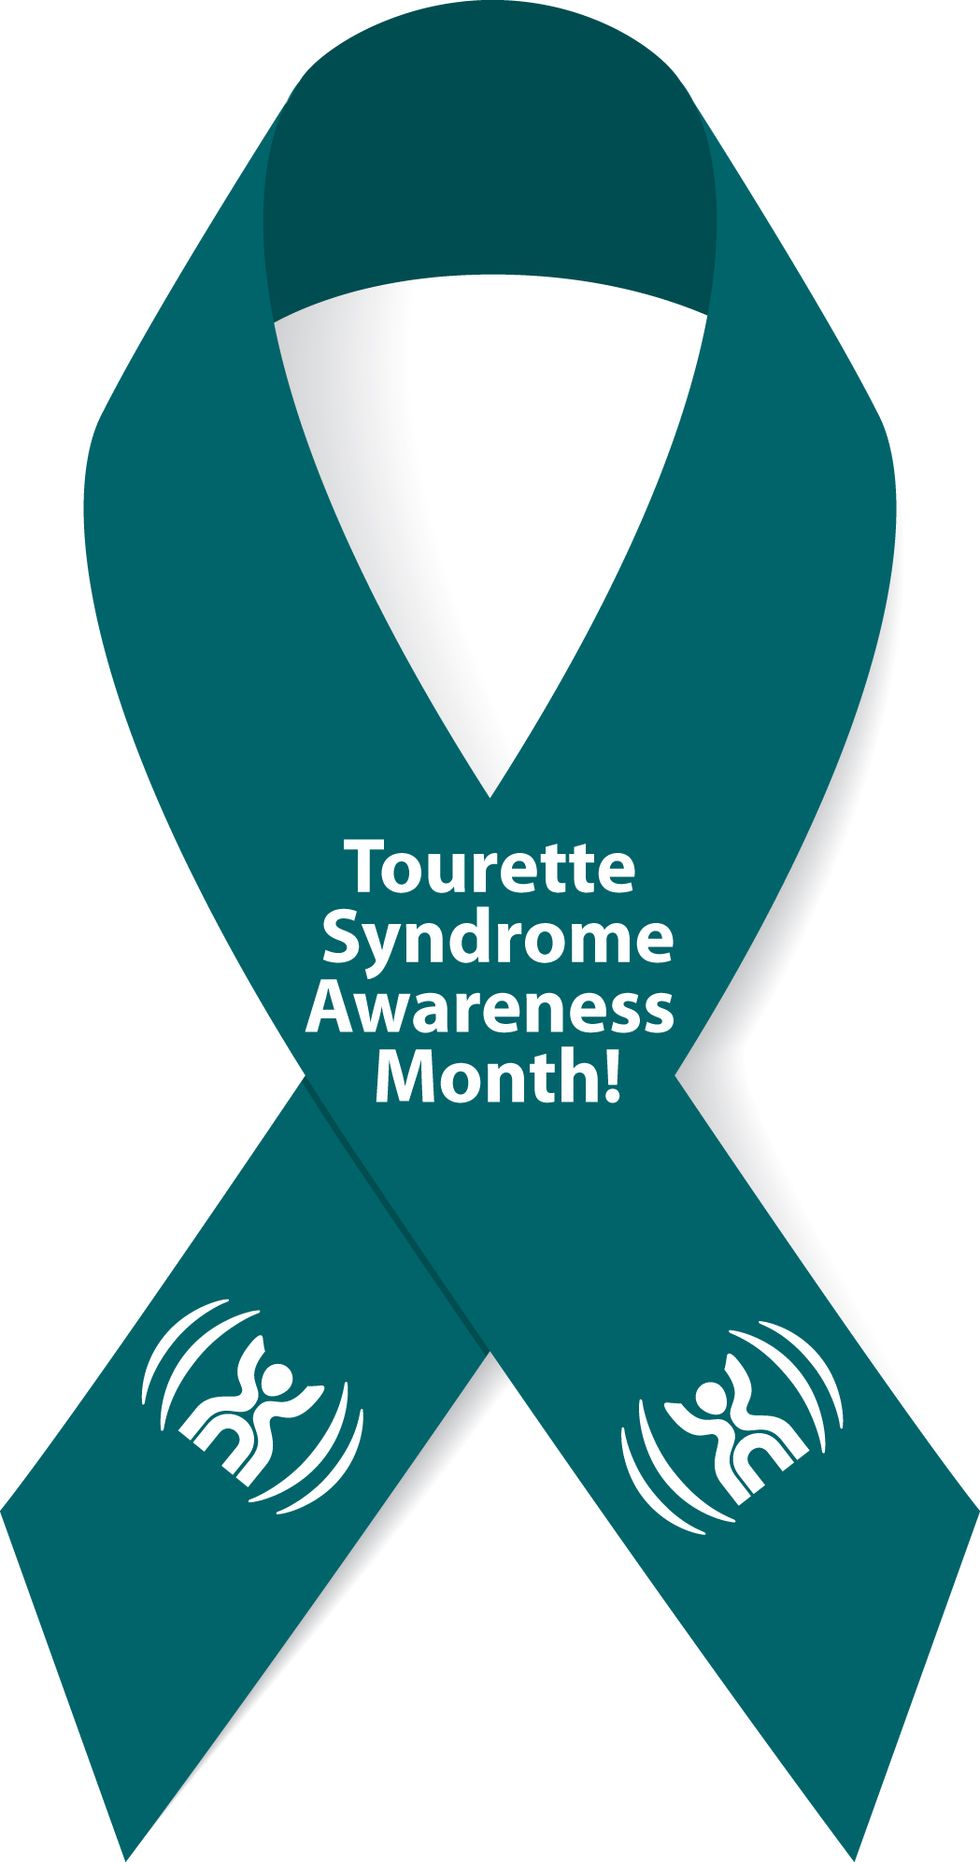 A 100 Percent True Account of What It's Like To Have Tourette Syndrome